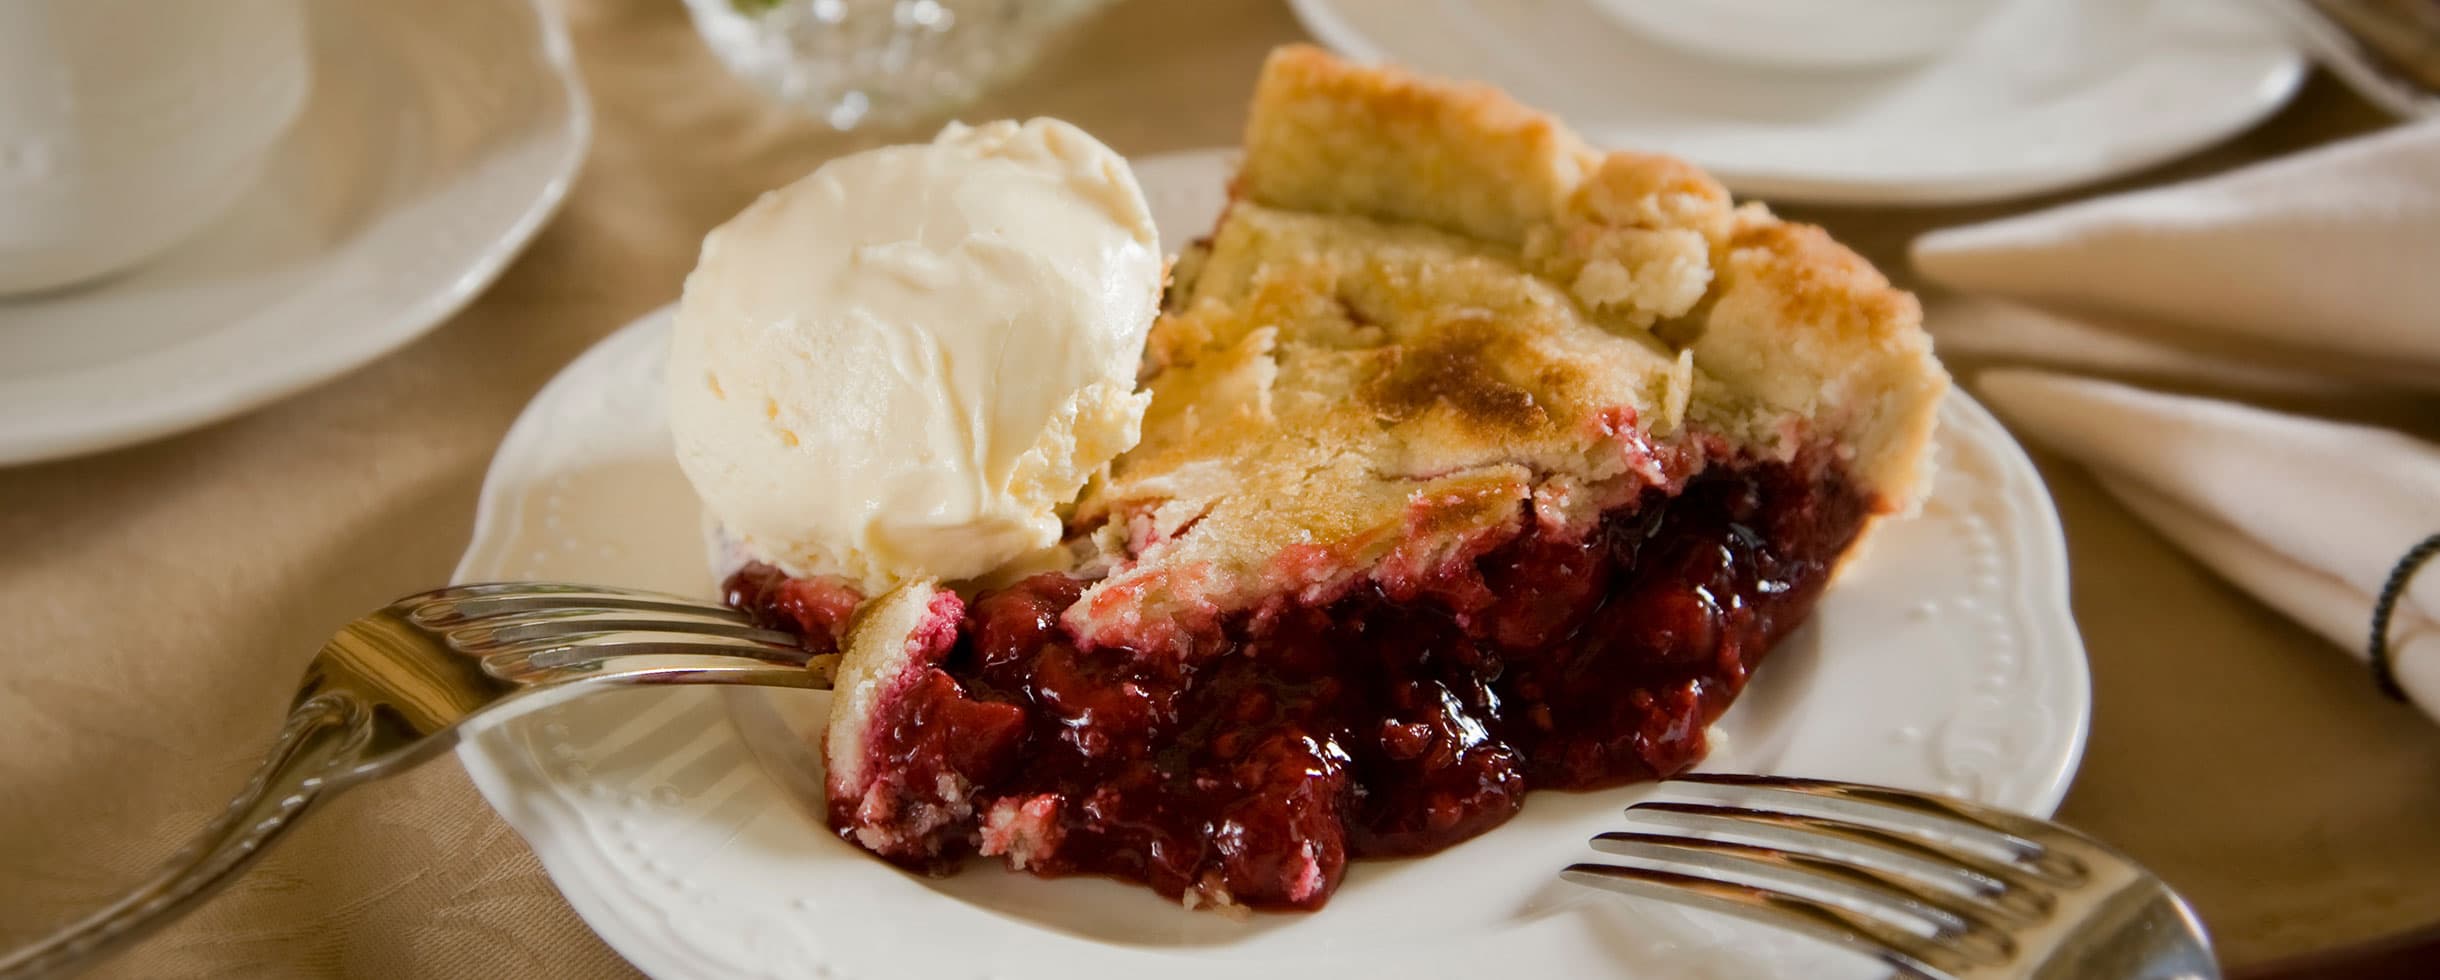 slice of red berry pie with vanilla ice cream a la mode on a white plate with two forks